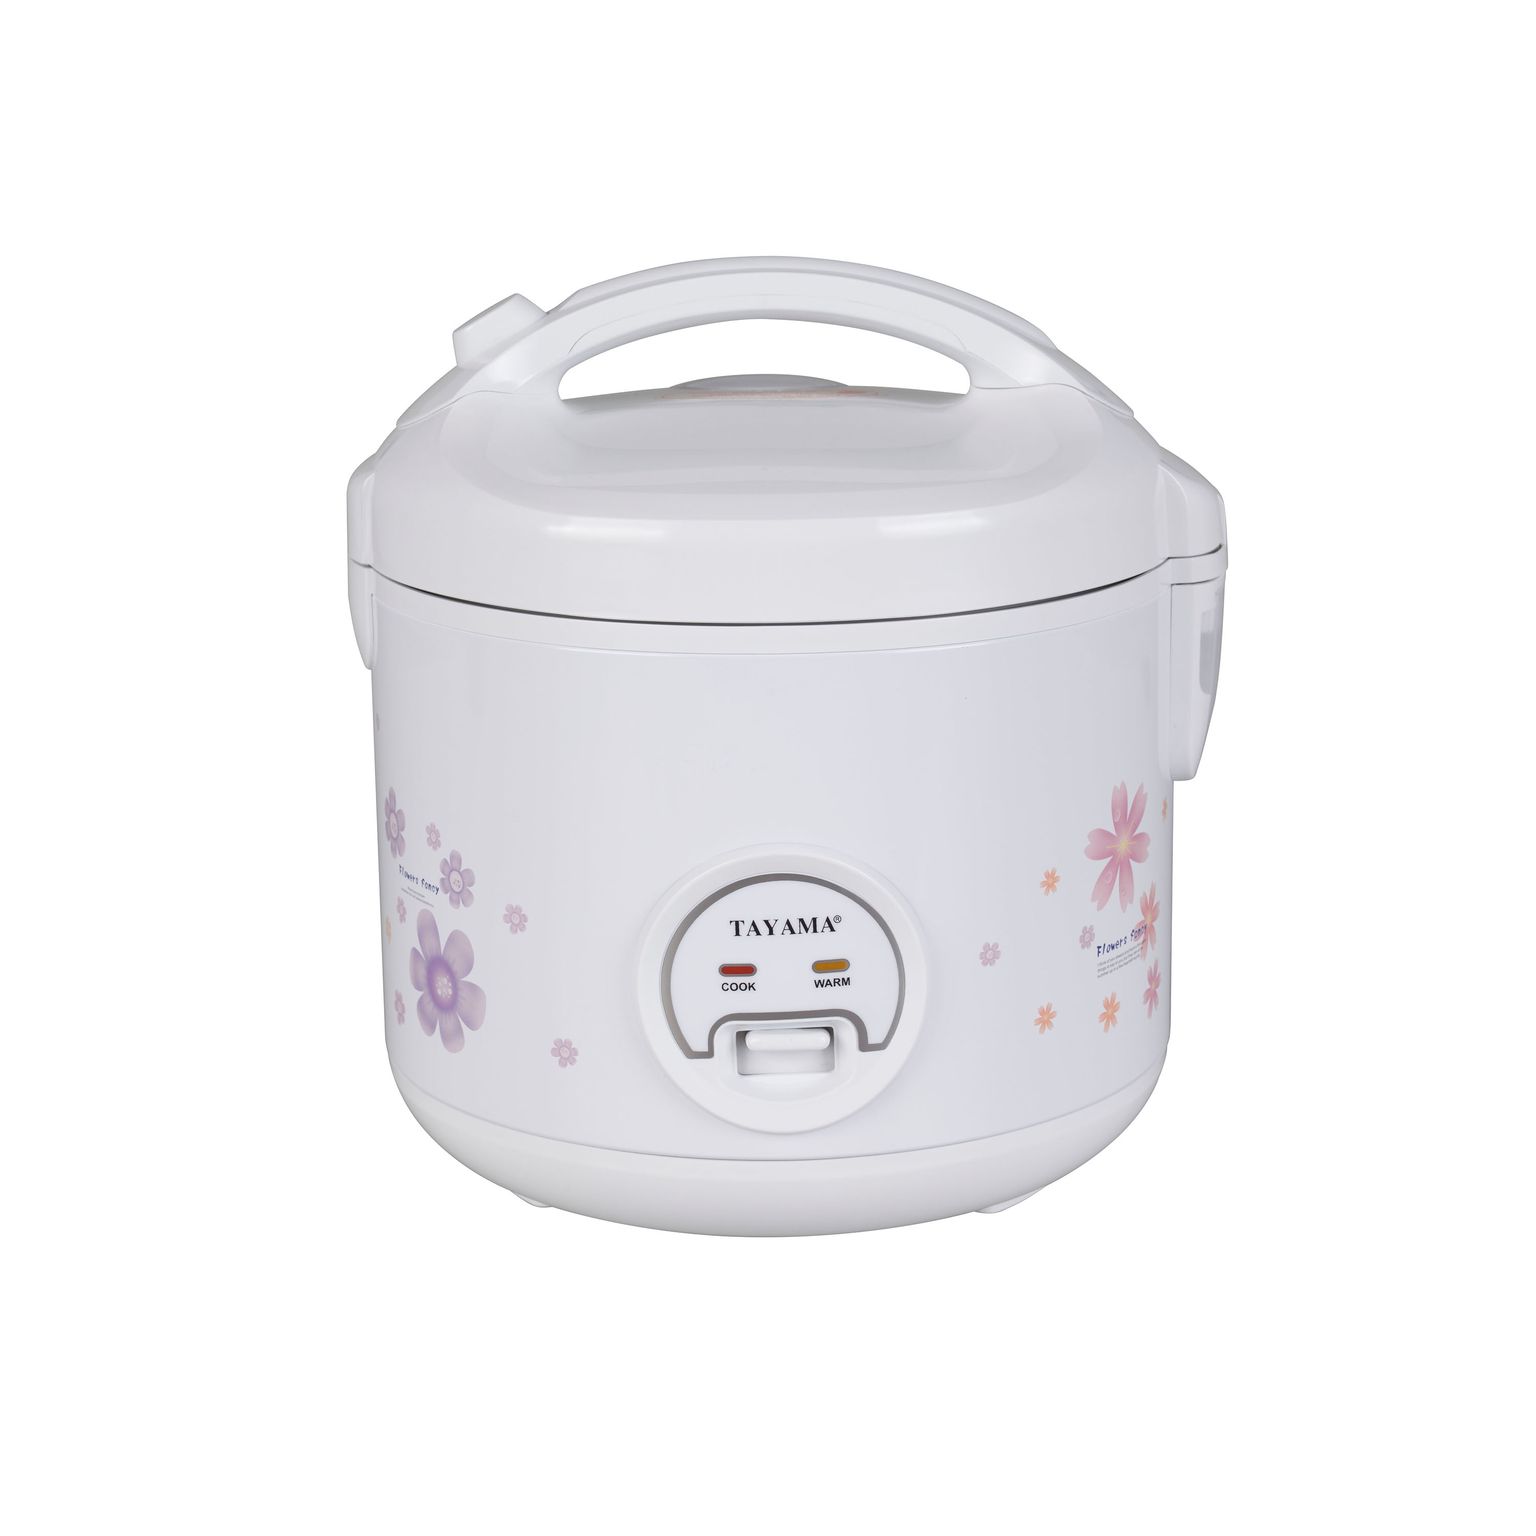 Trc-10 10 Cup Cool-touch Rice Cooker